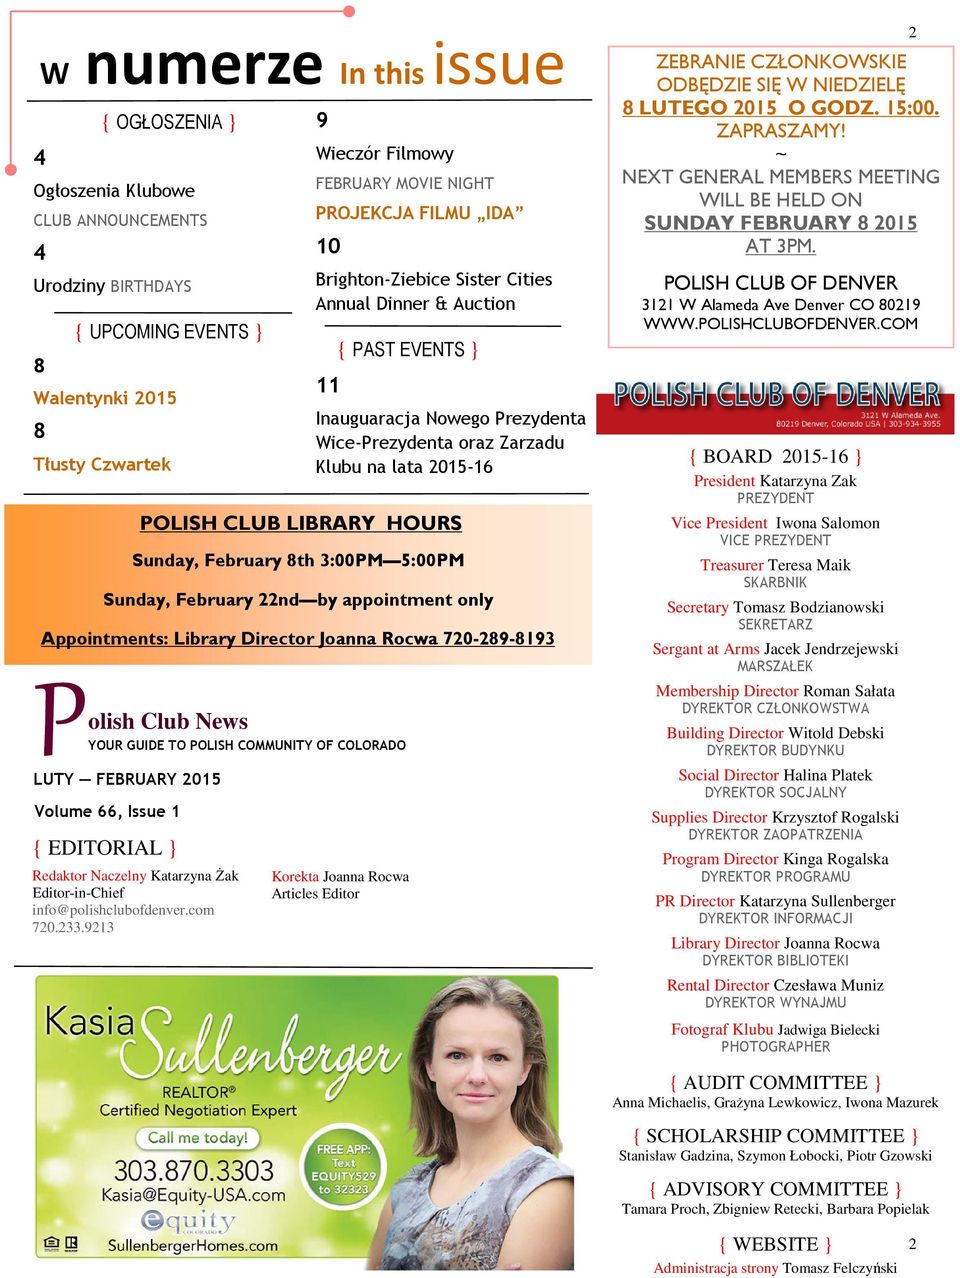 HOURS Sunday, February 8th 3:00PM 5:00PM Sunday, February 22nd by appointment only Appointments: Library Director Joanna Rocwa 720-289-8193 P olish Club News YOUR GUIDE TO POLISH COMMUNITY OF